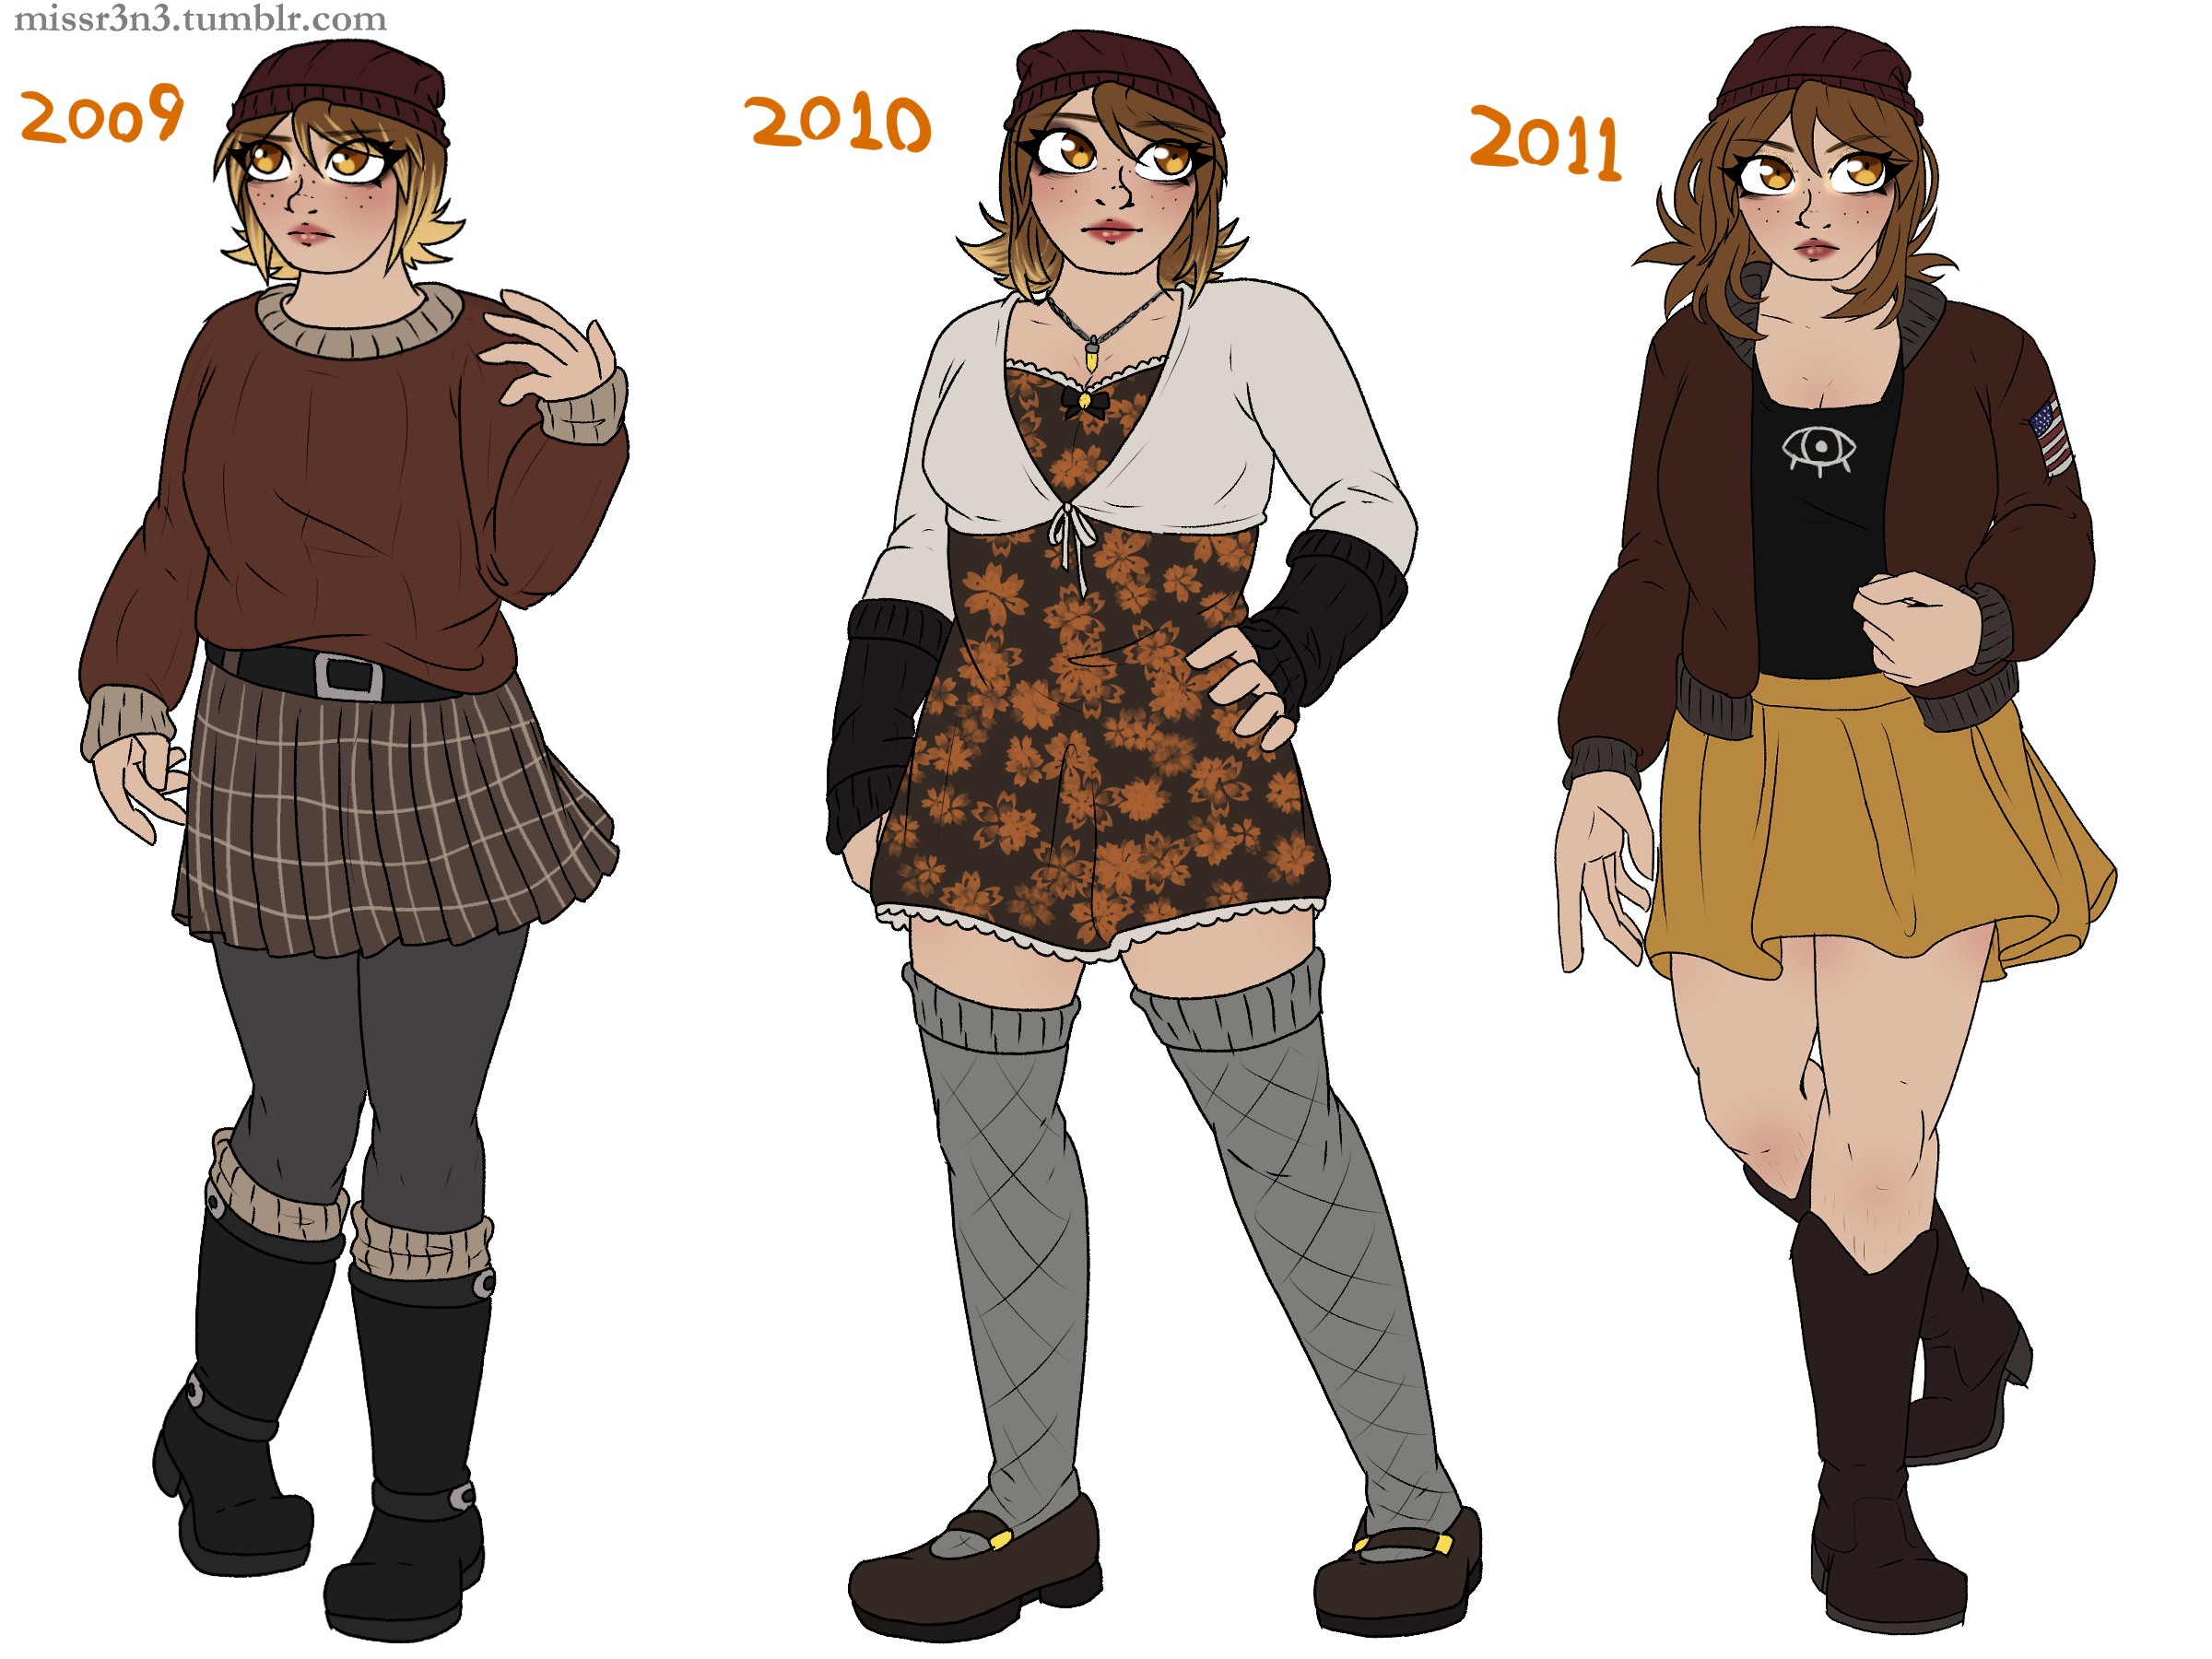 leah milton's 2009, 2010, and 2011 designs